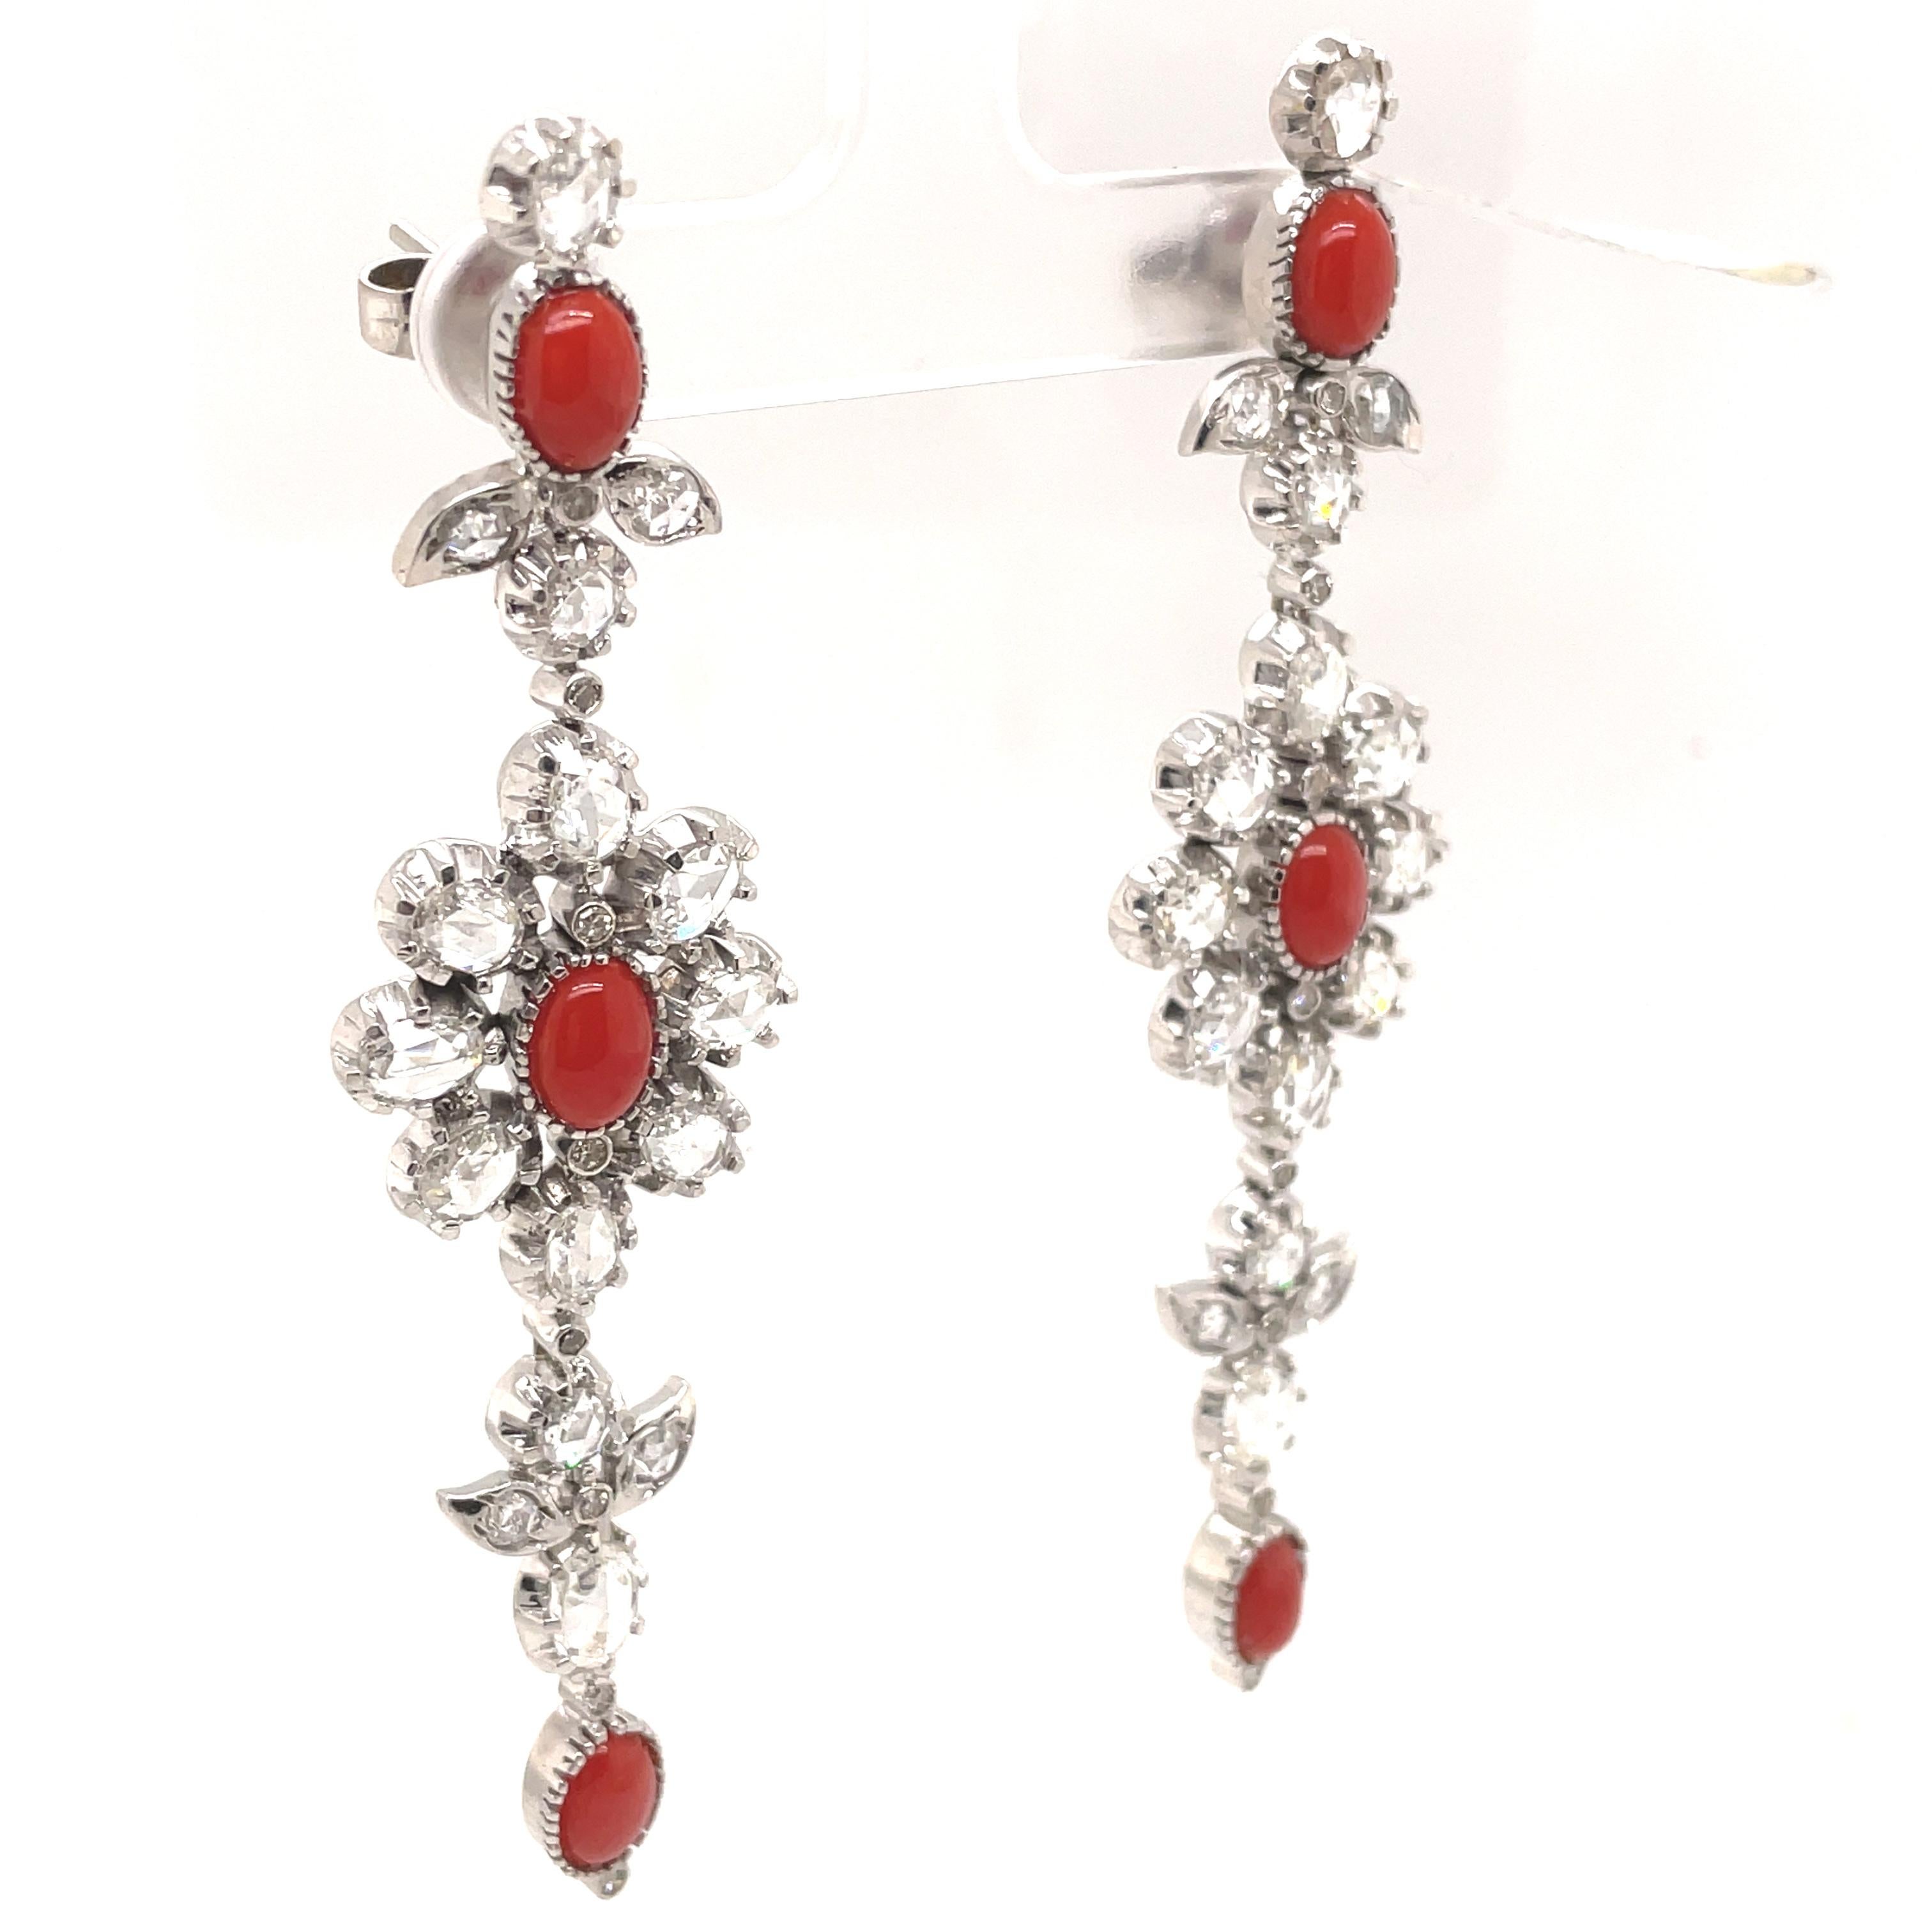 Contemporary 4.54ct Rose Cut Diamond and Coral Chandelier Earrings 18k White Gold For Sale